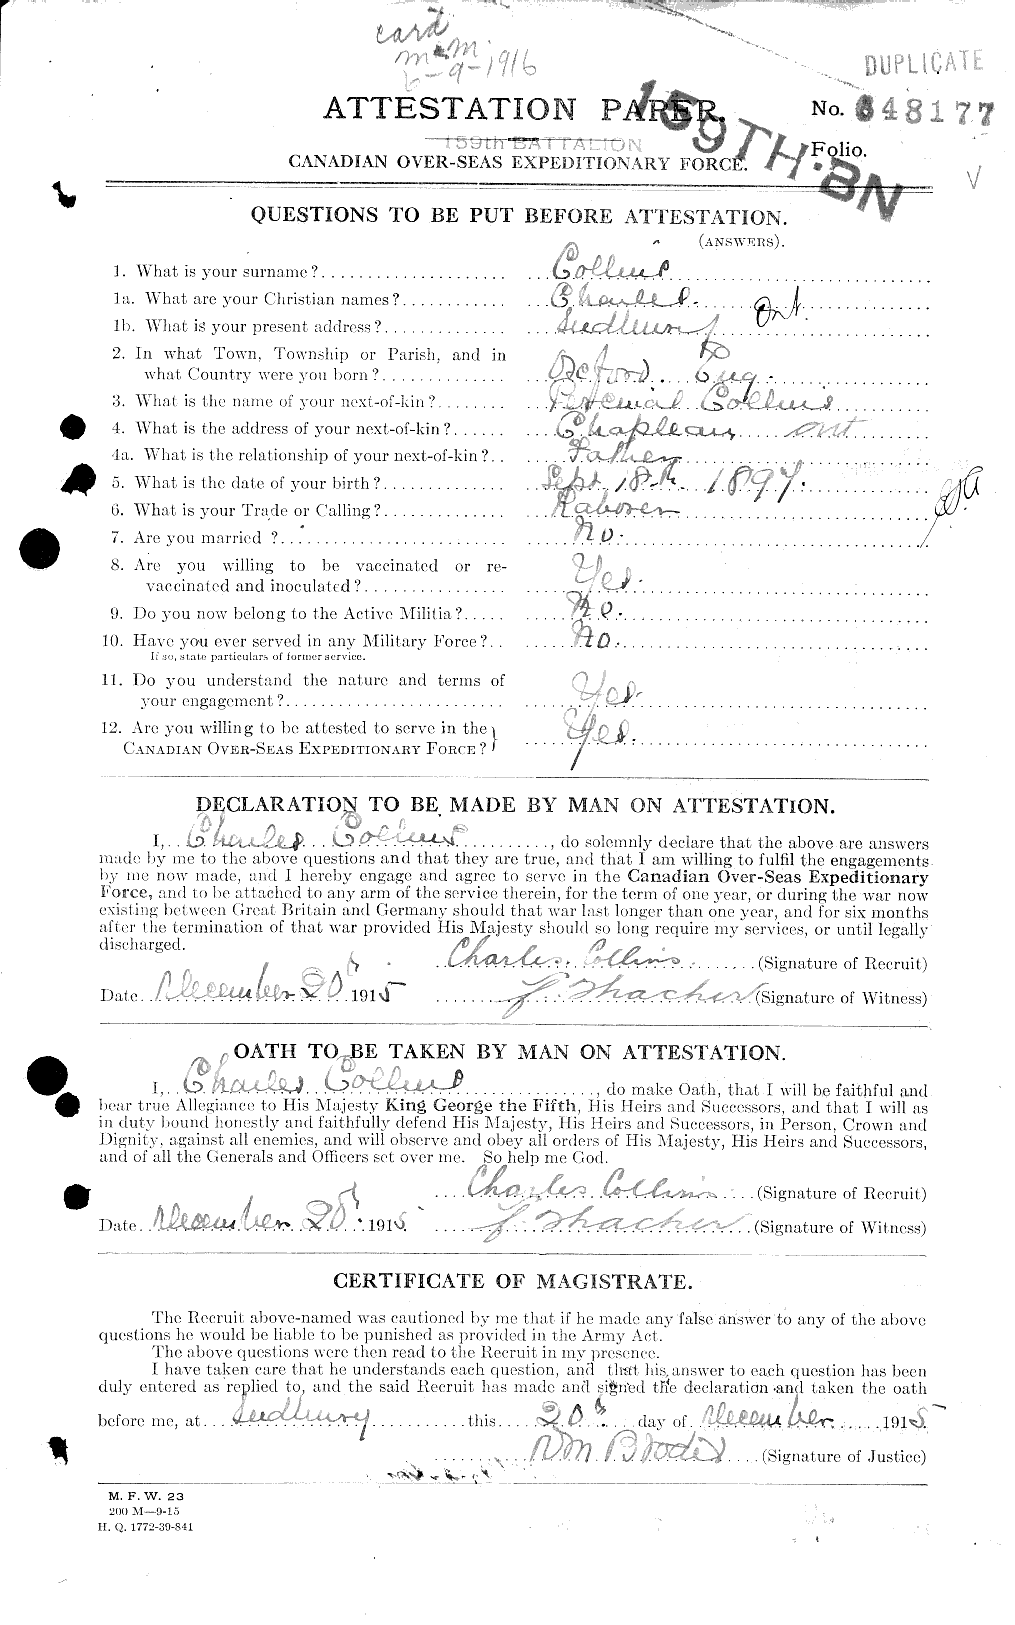 Personnel Records of the First World War - CEF 029013a